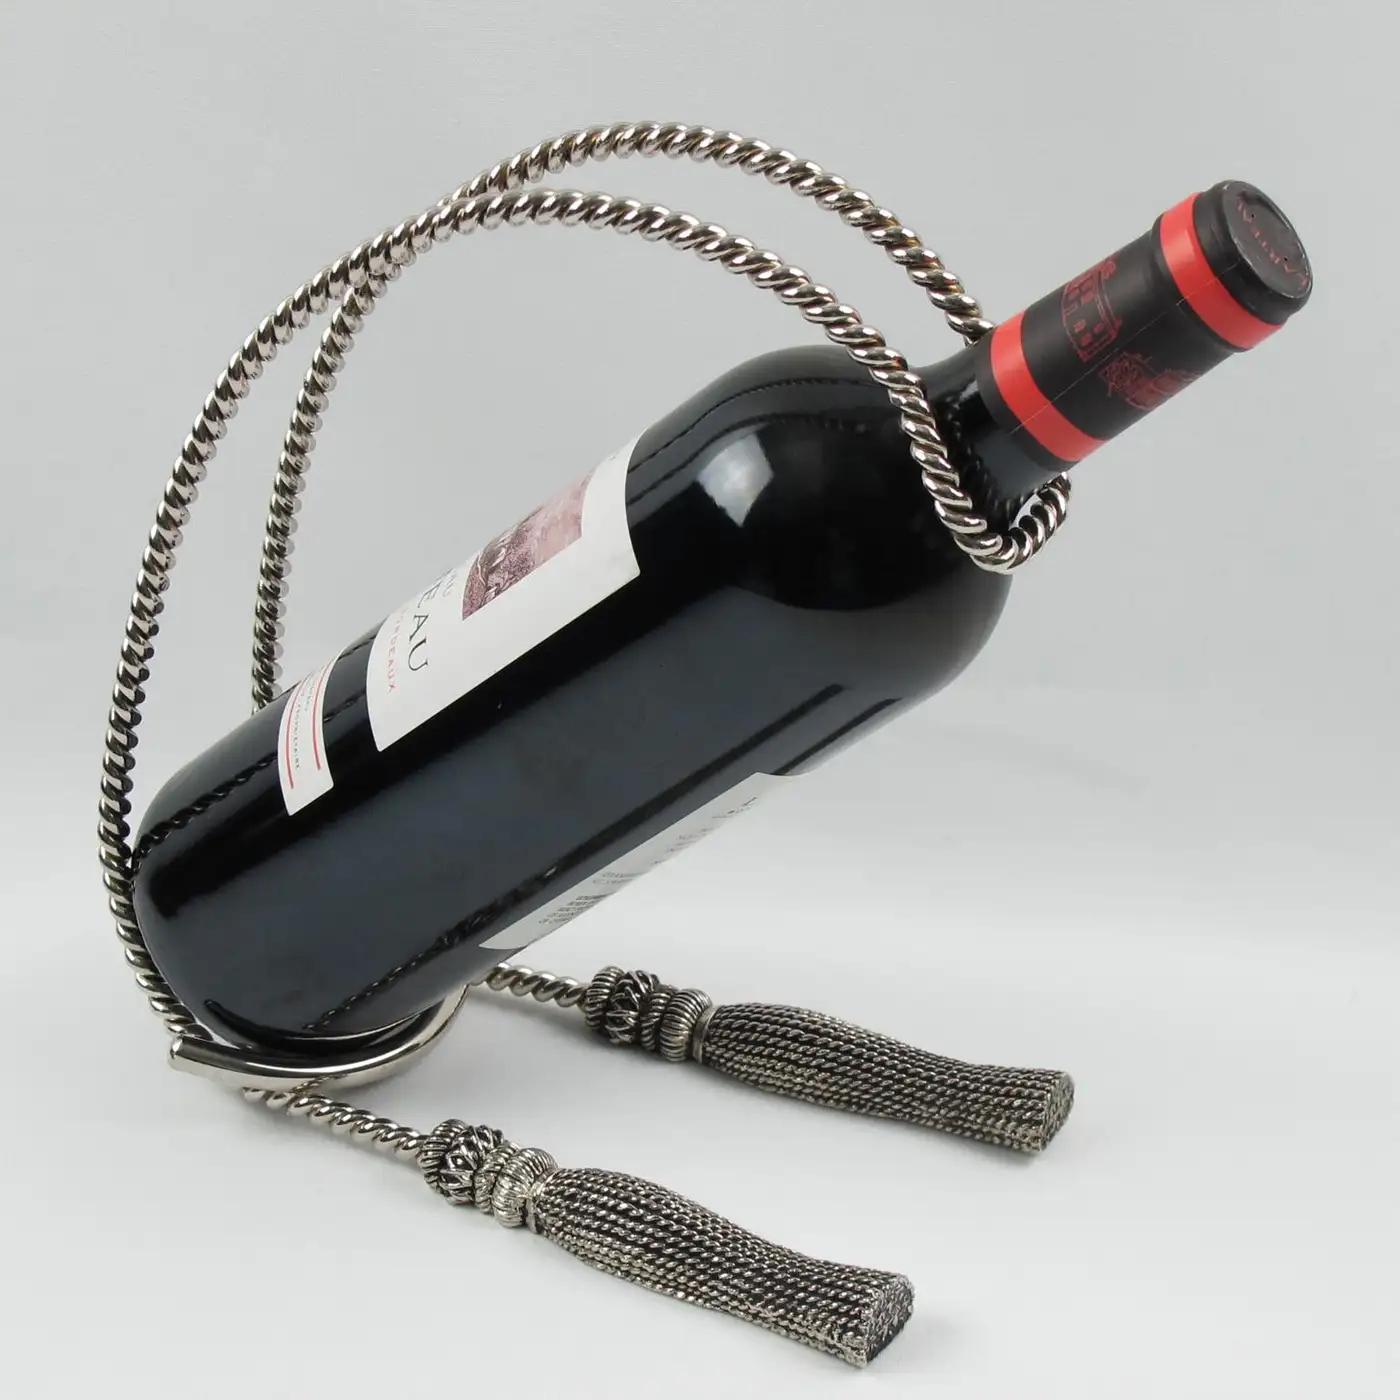 This lovely French wine bottle holder, pourer, or caddy in silver plate metal has an elegant shape with two large tassels base and rope carving. The classic and refined constructed design is reminiscent of Maria Pergay's work. There is no visible